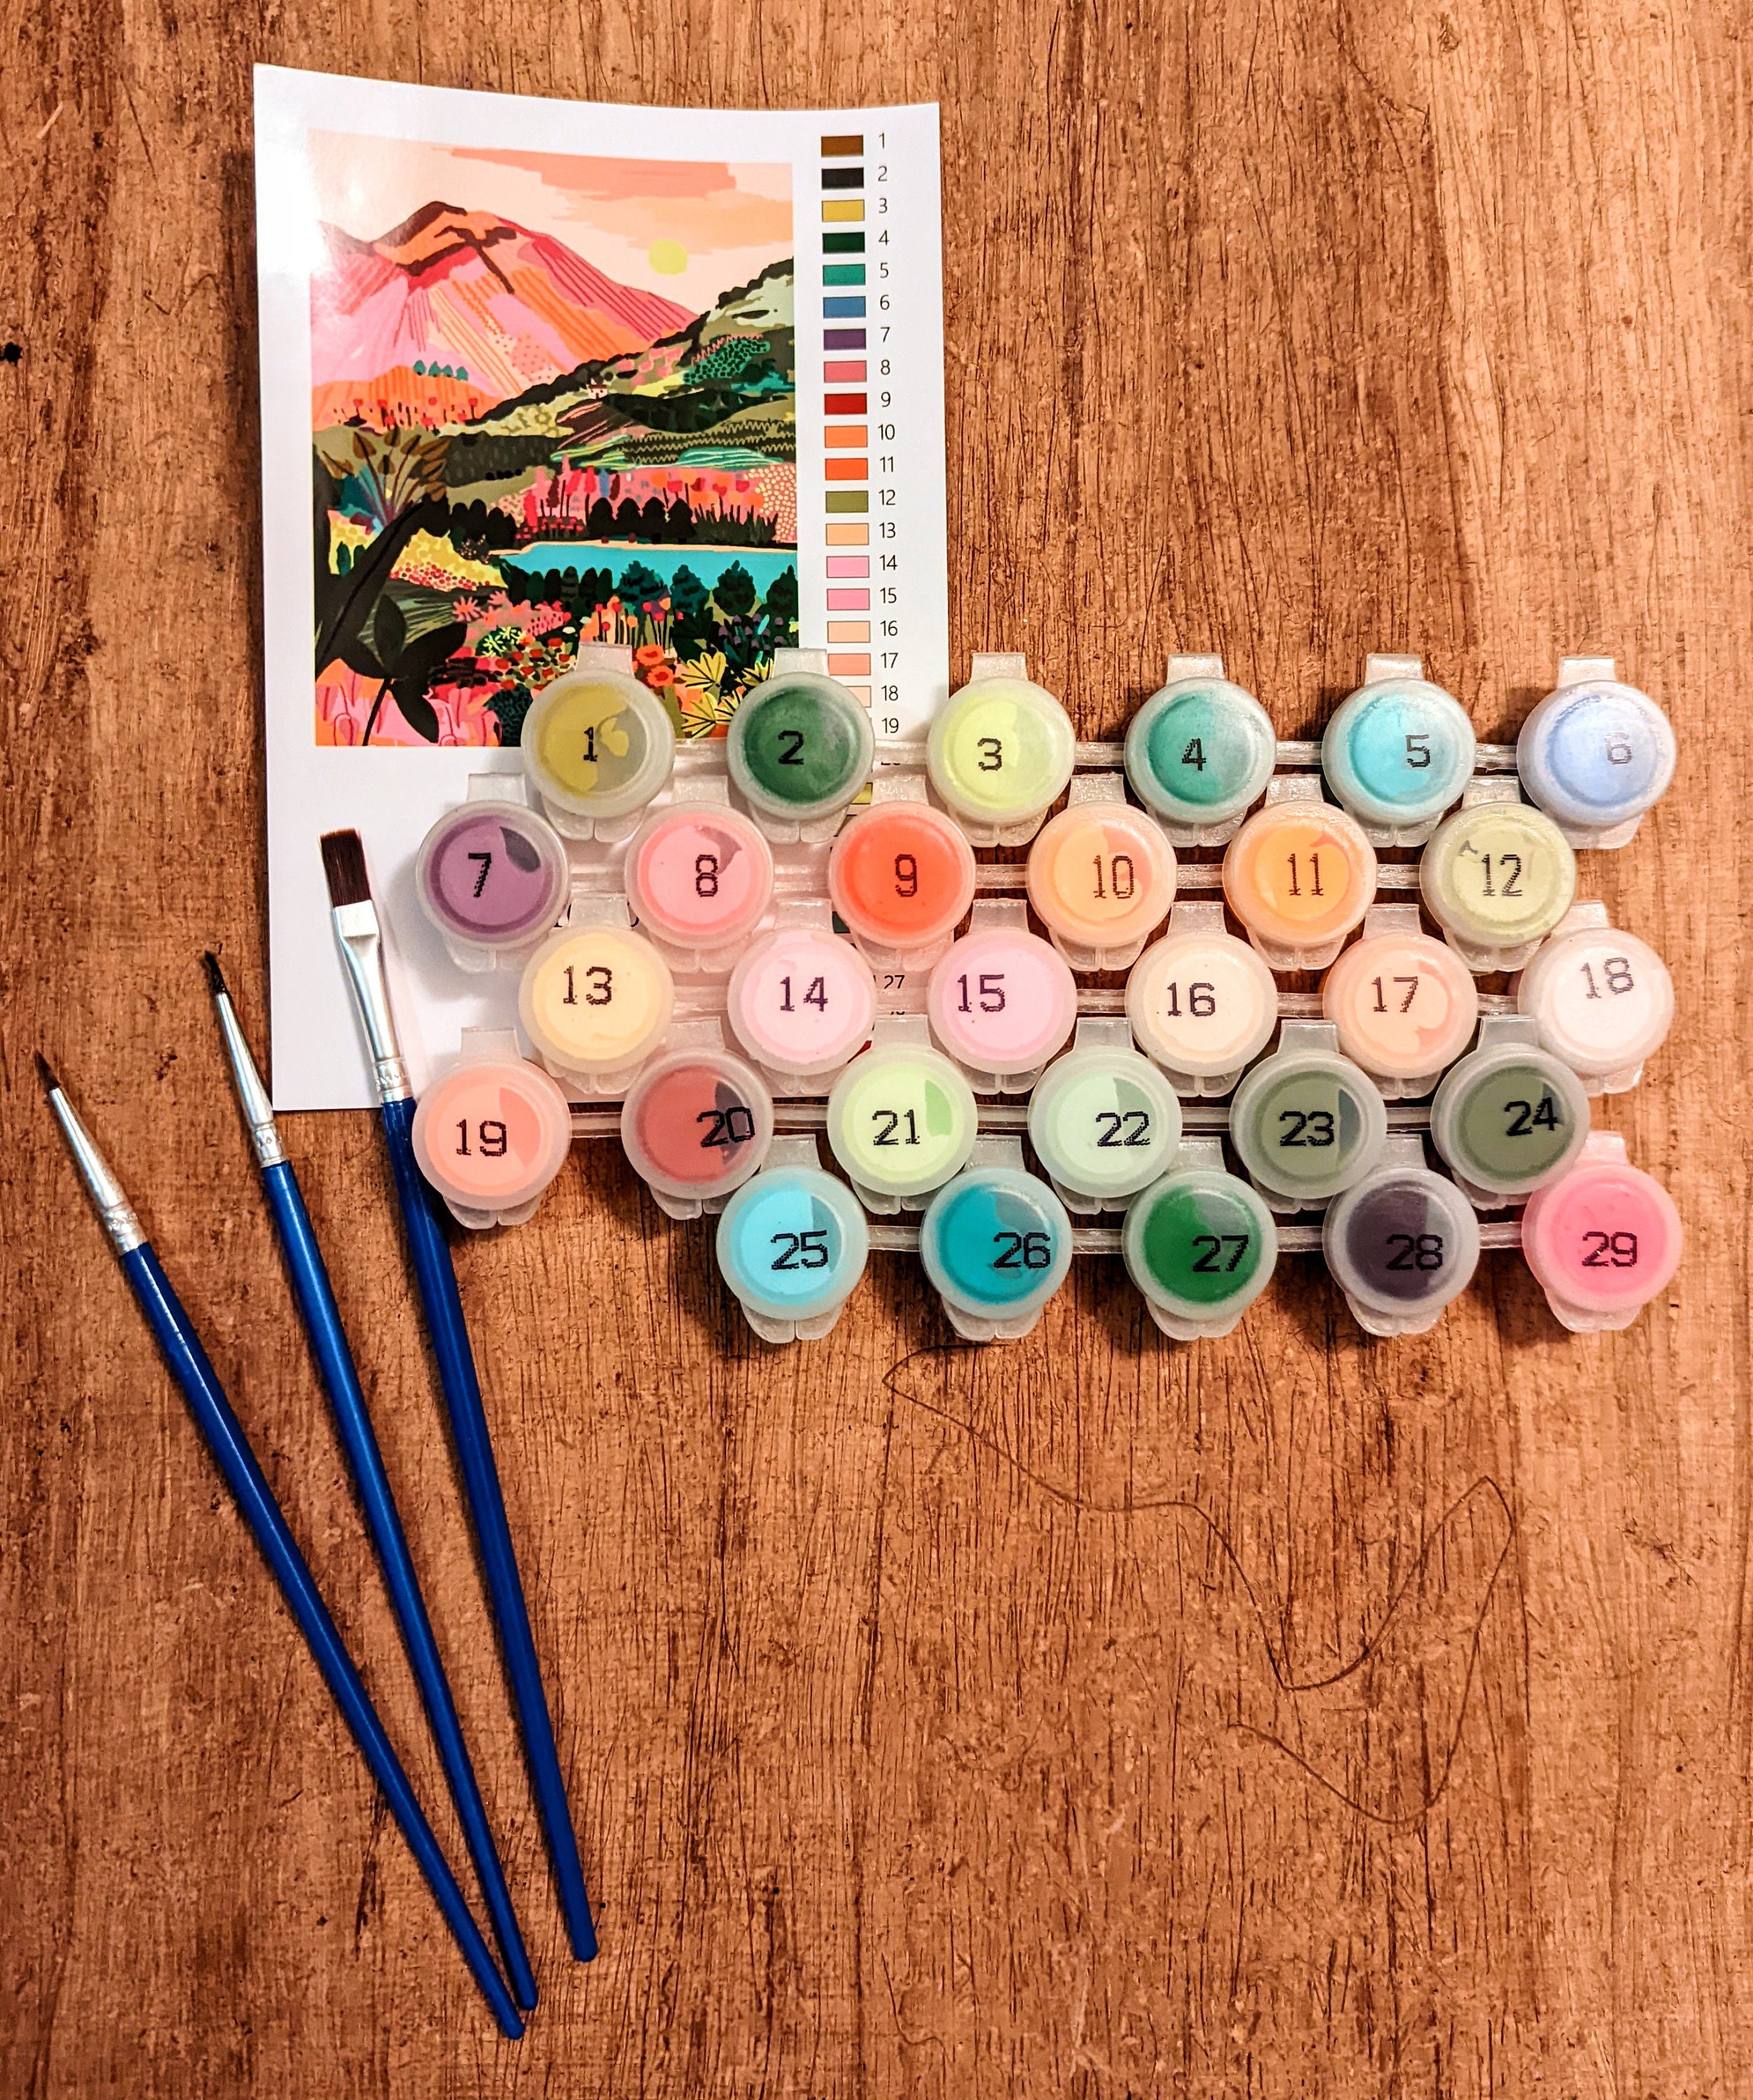 Acrylic Paint Value Set by Craft Smart 36 Assorted Colors 